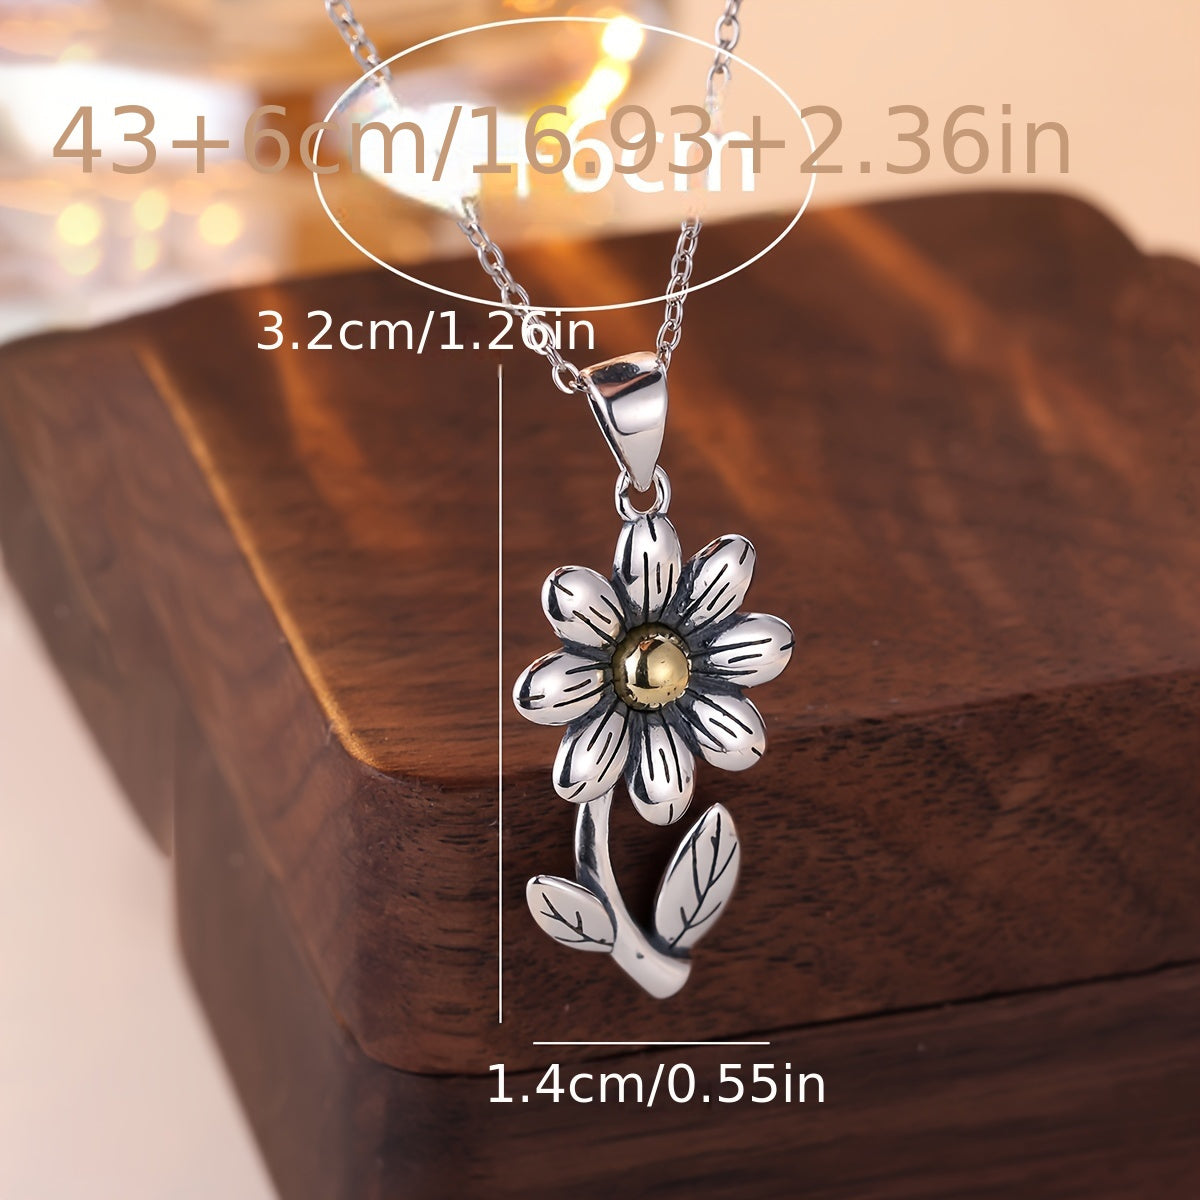 925 Sterling Silver Simple Daisy Pendant Necklace - Boho Party Favors Jewelry